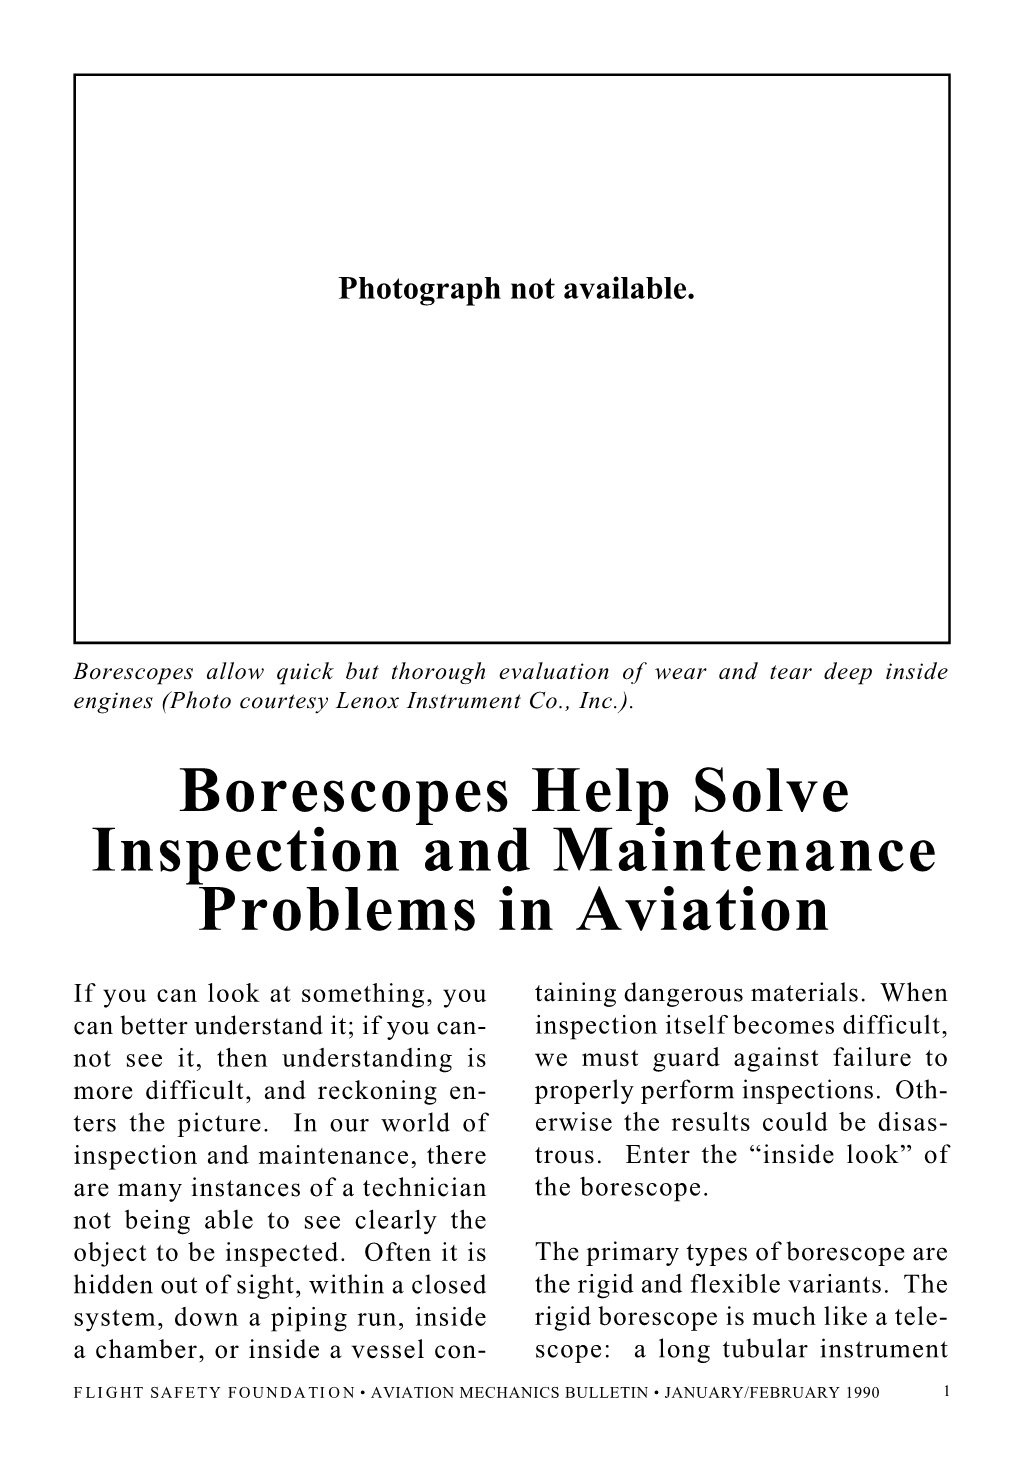 Borescopes Help Solve Inspection and Maintenance Problems in Aviation